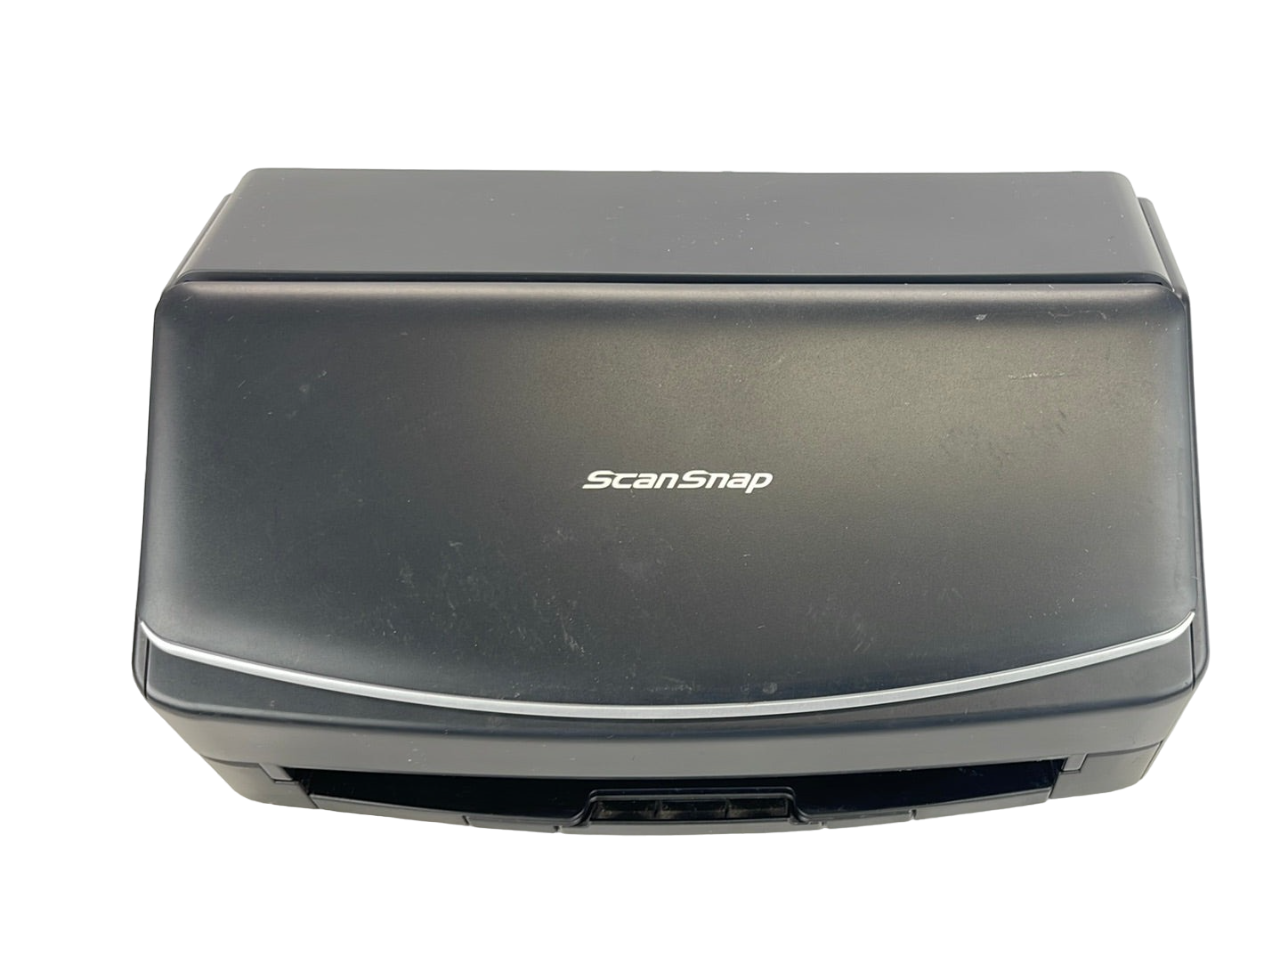 FUJITSU Image Scanner ScanSnap iX1500 **SEE CONDITIONS**